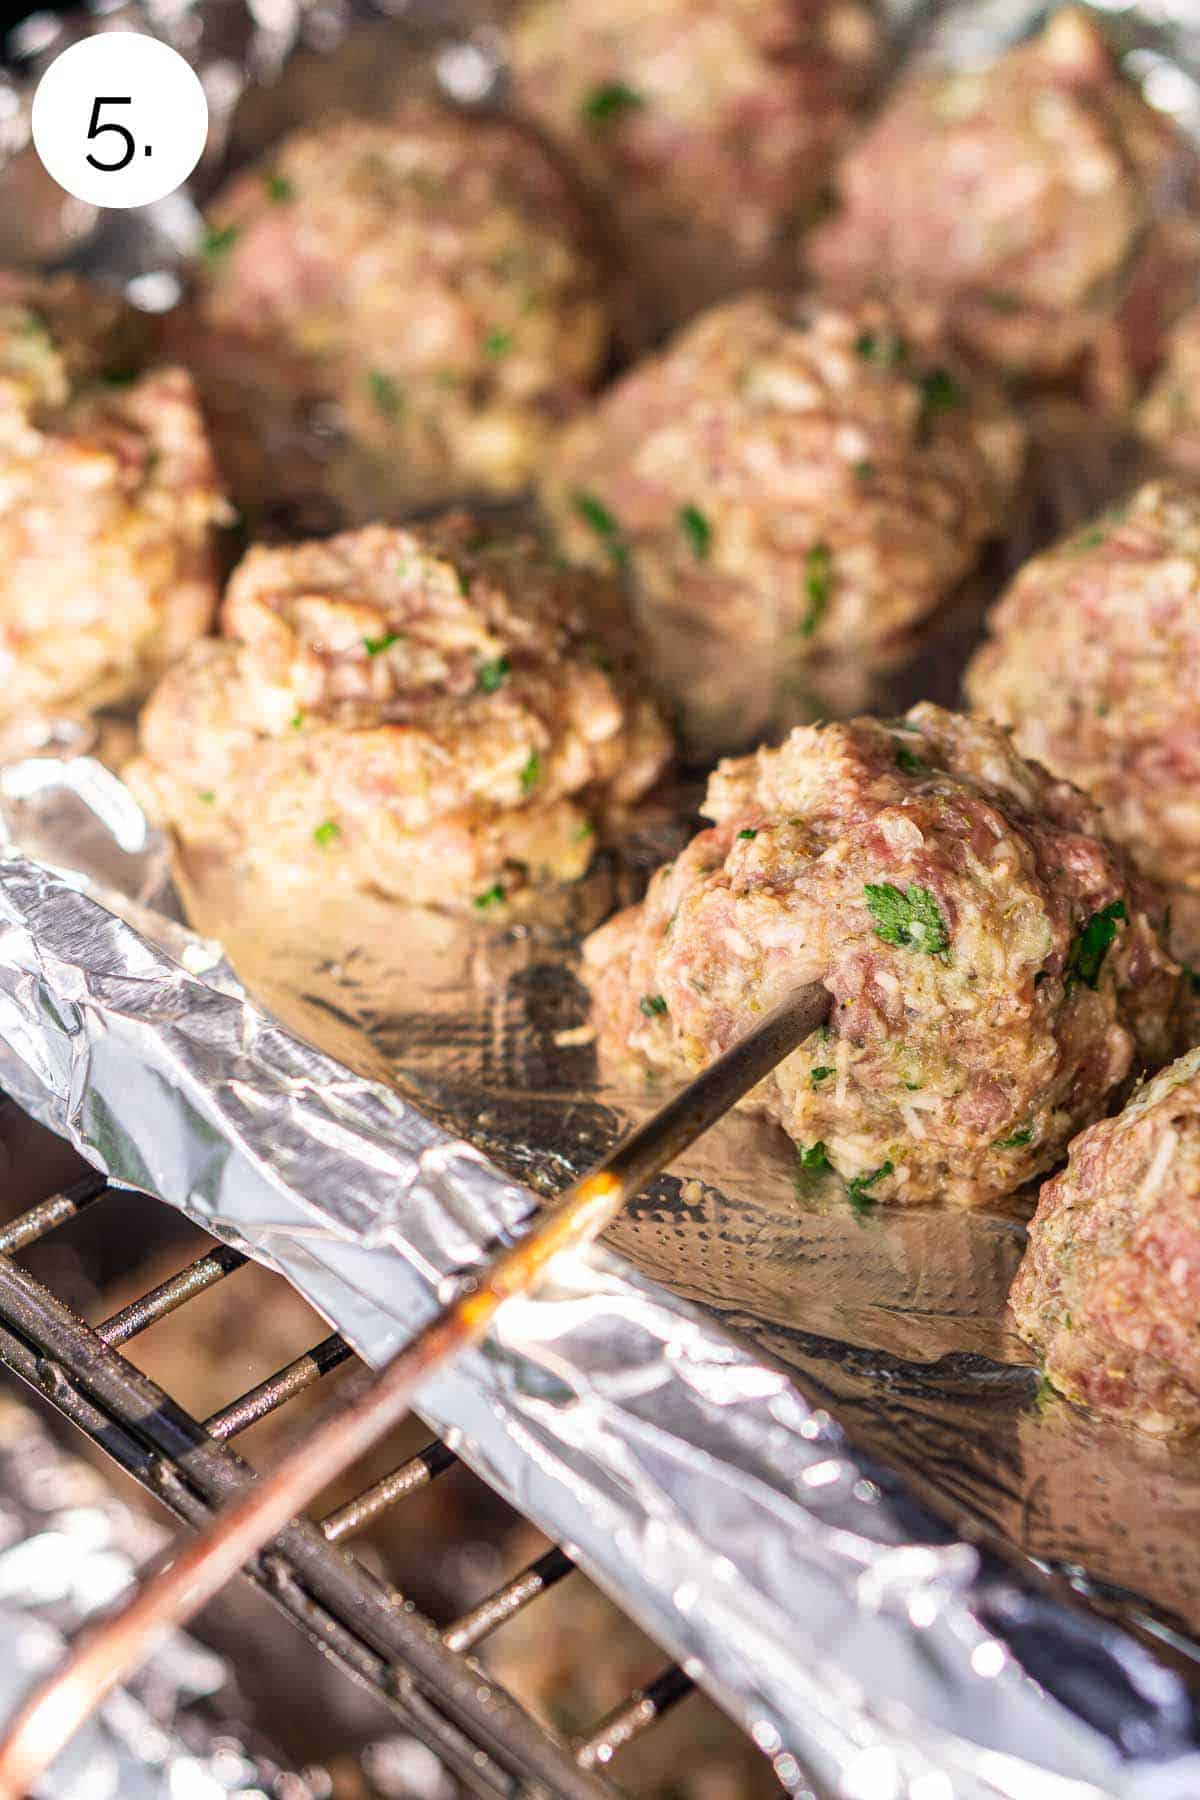 The meatballs on a baking sheet lined with aluminum foil in the smoker with a leave-in meat thermometer inserted into one of the meatballs.